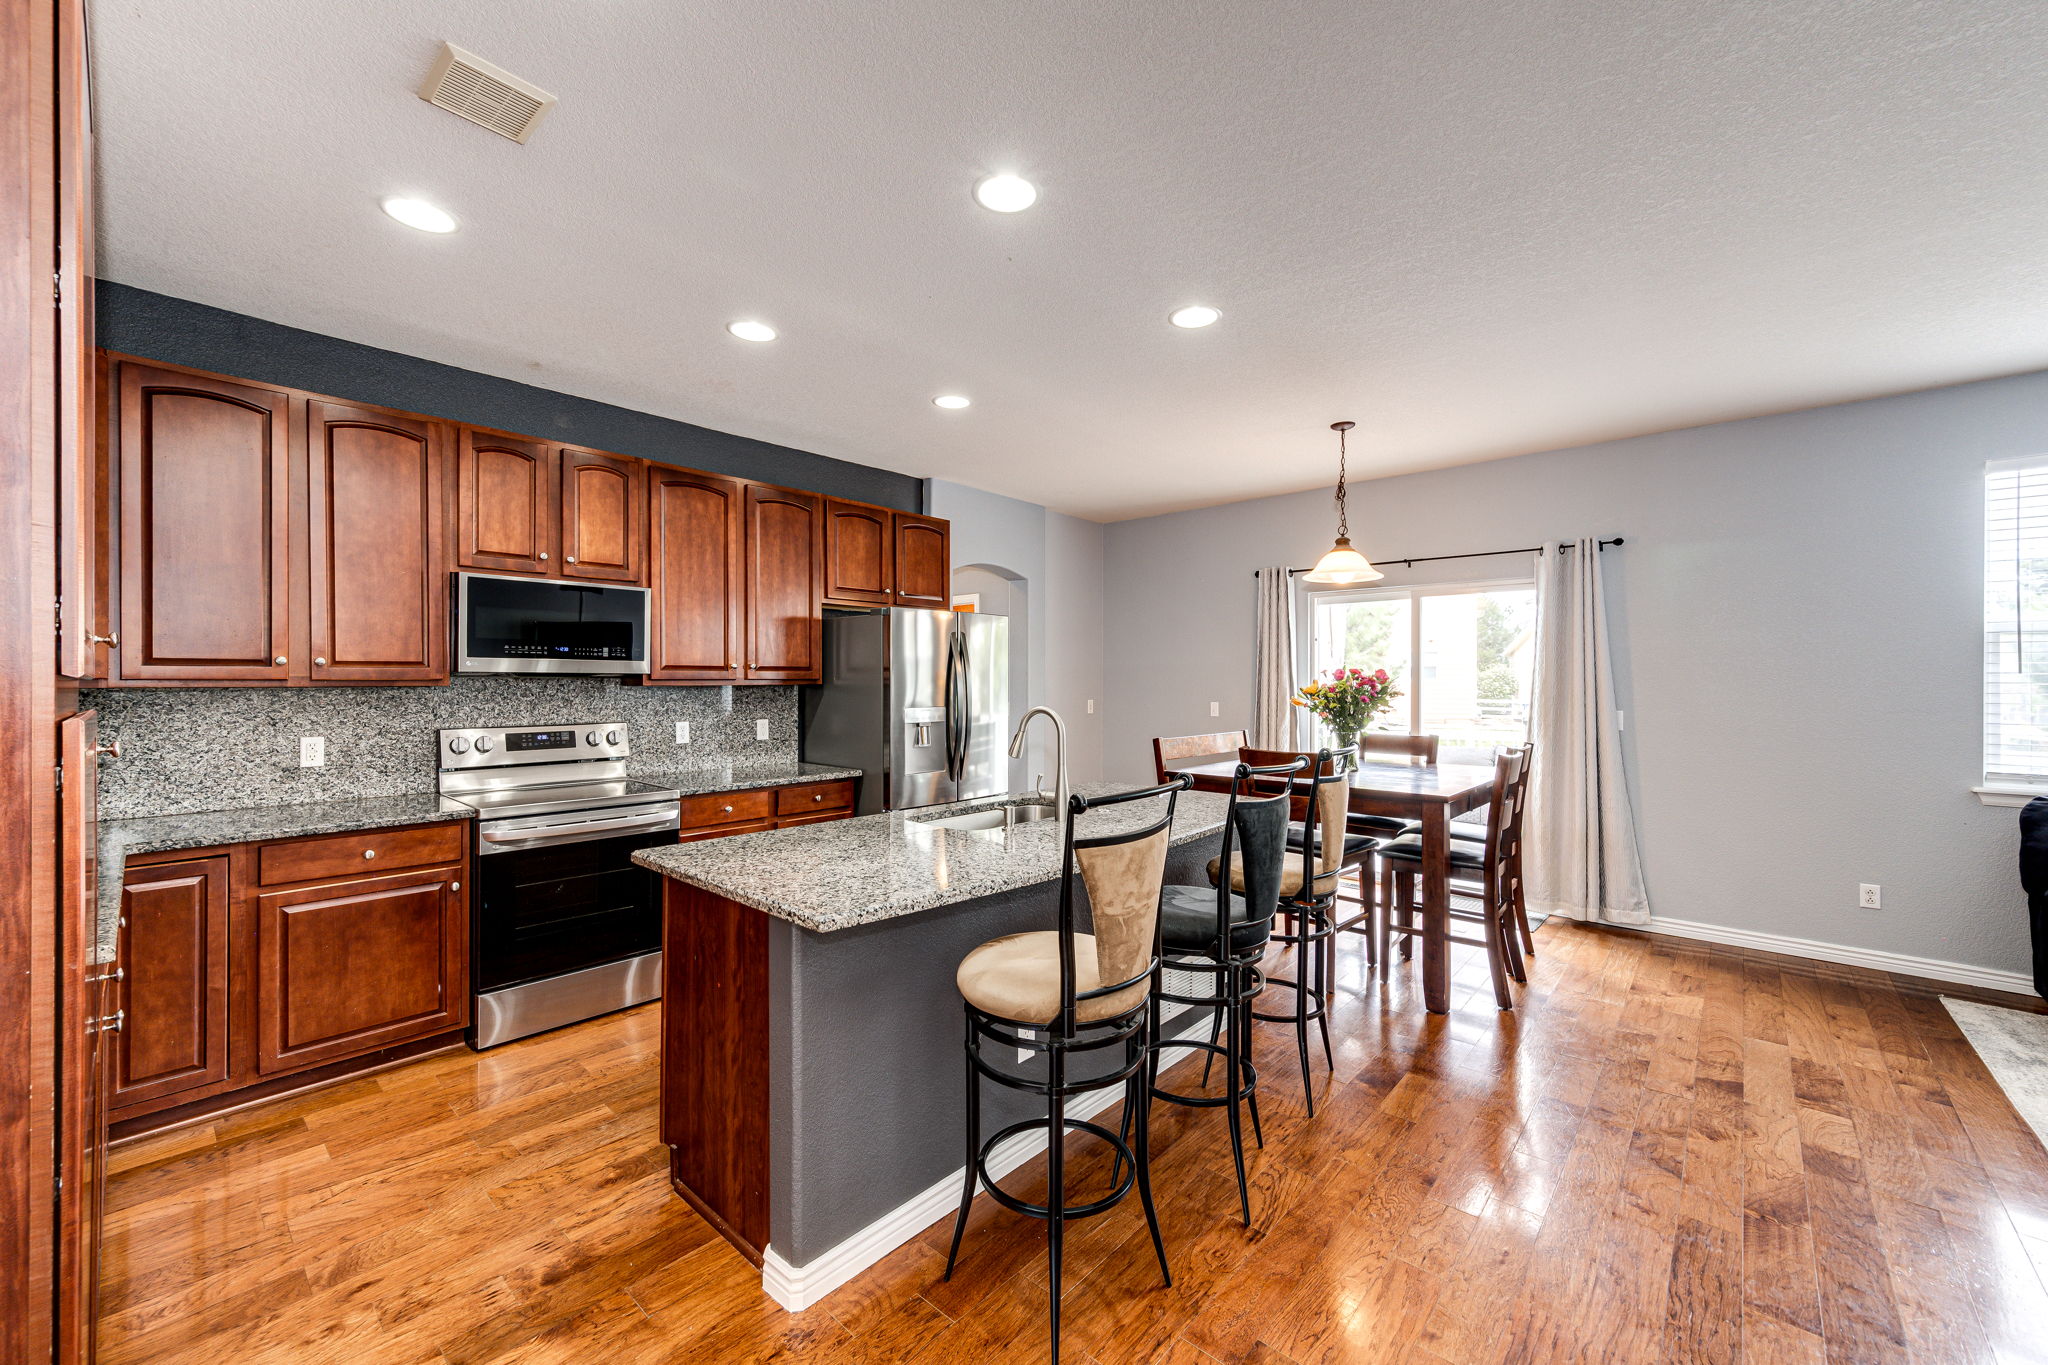 Spacious kitchen with granite countertops, stainless steel appliances and plenty of cabinets